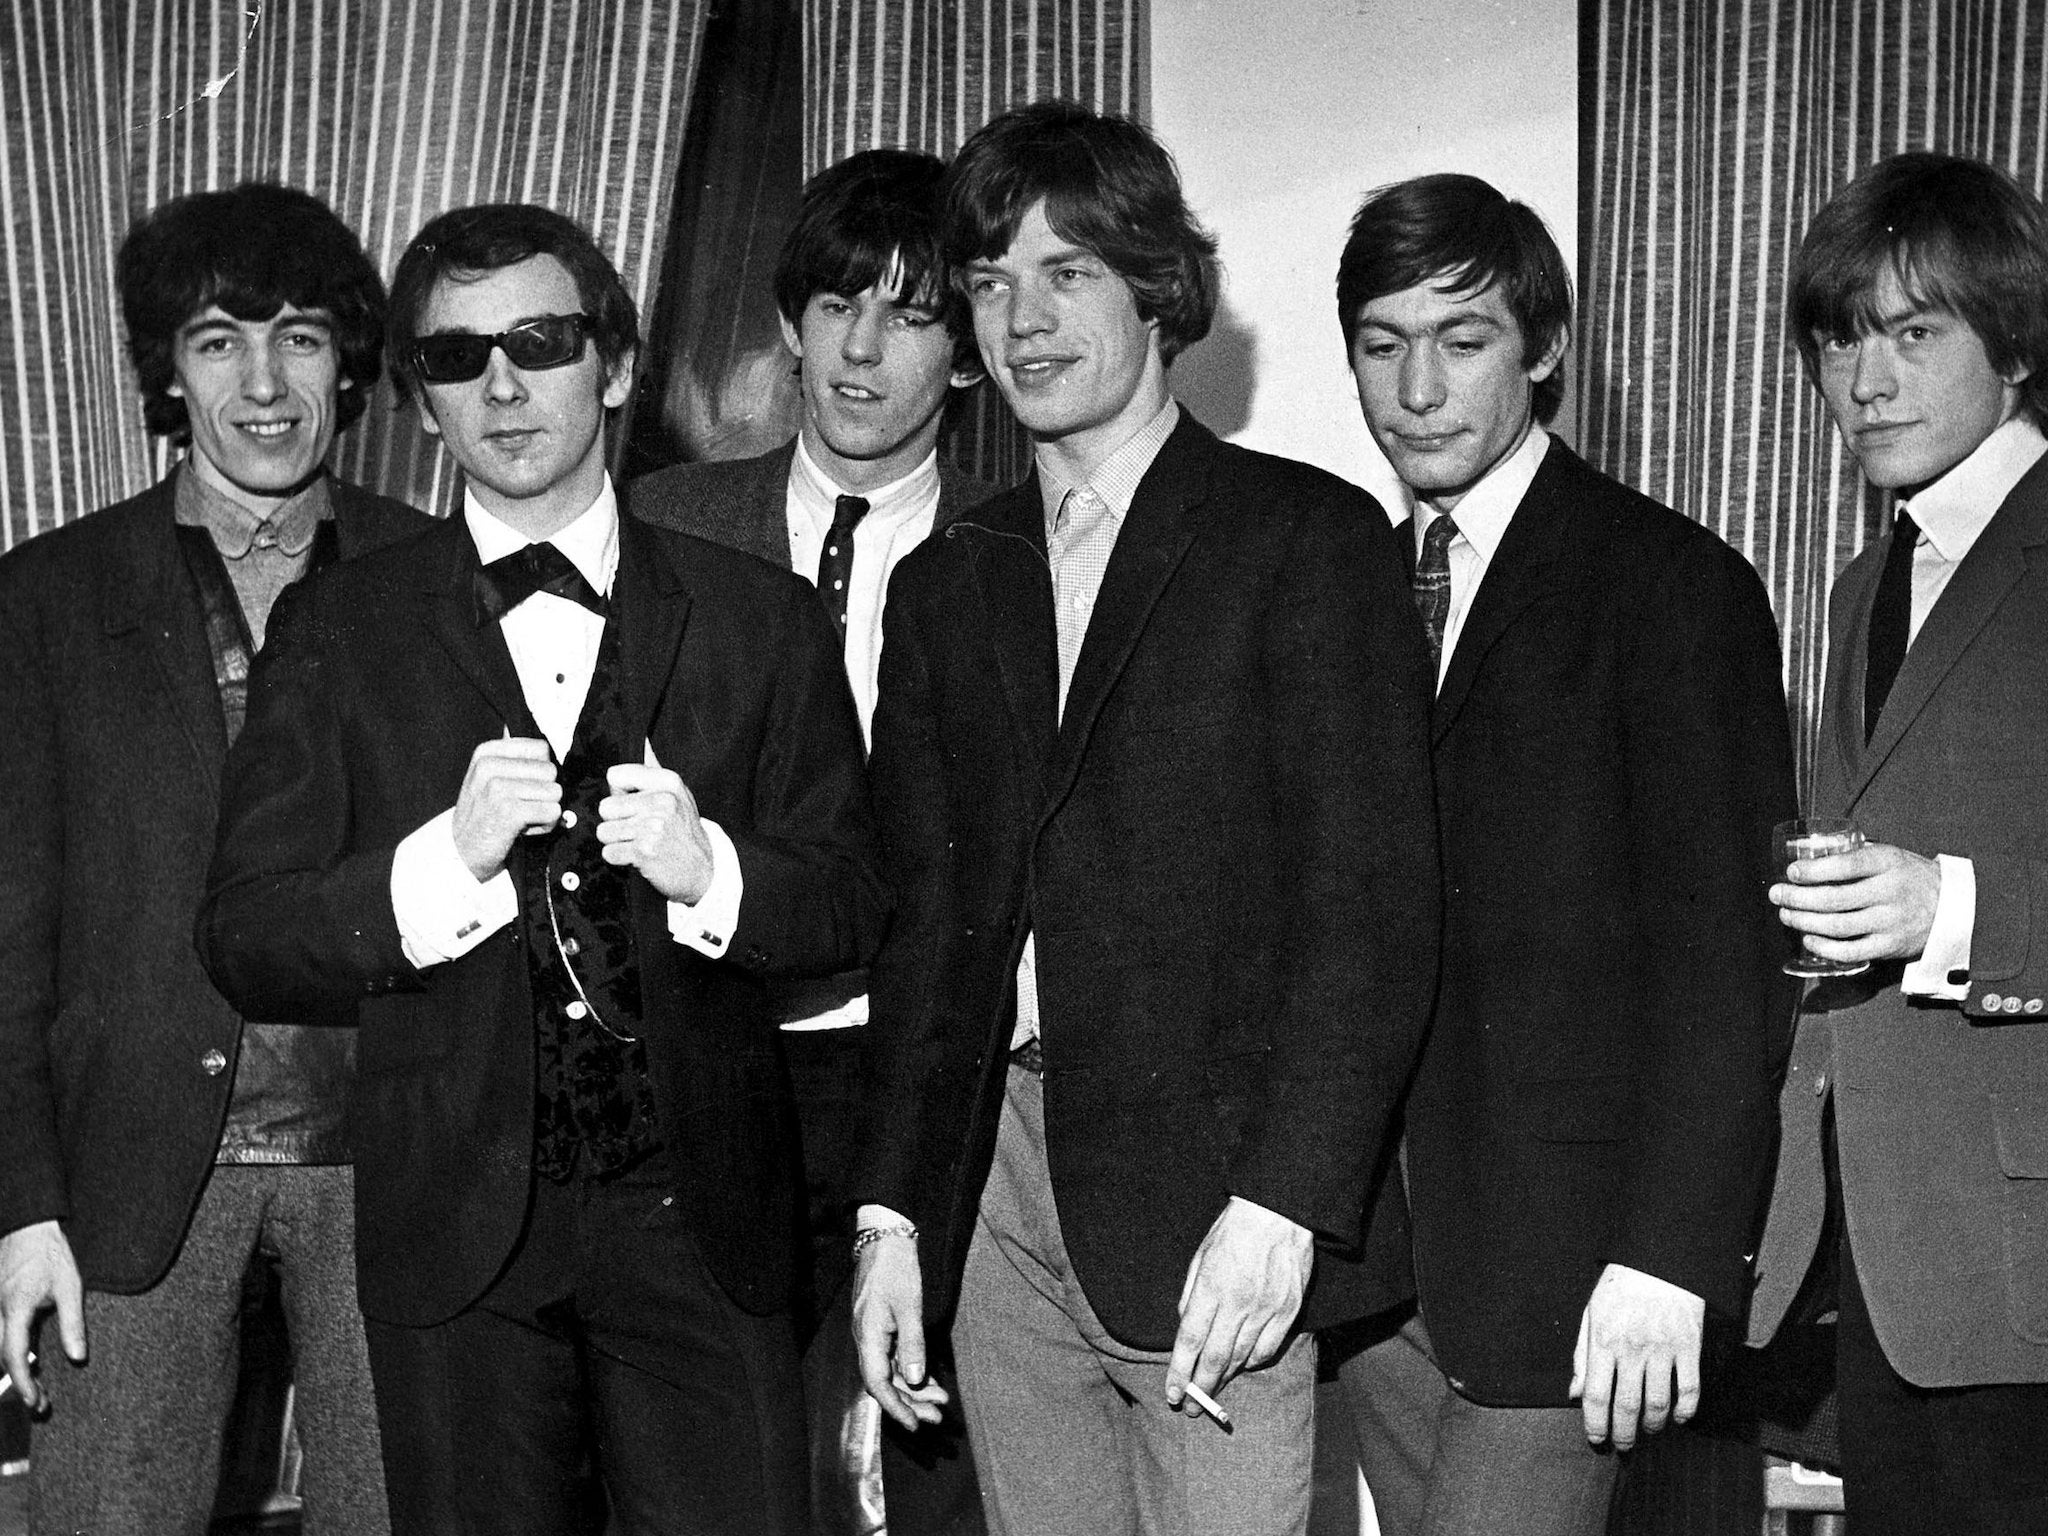 Spector with The Rolling Stones in 1964